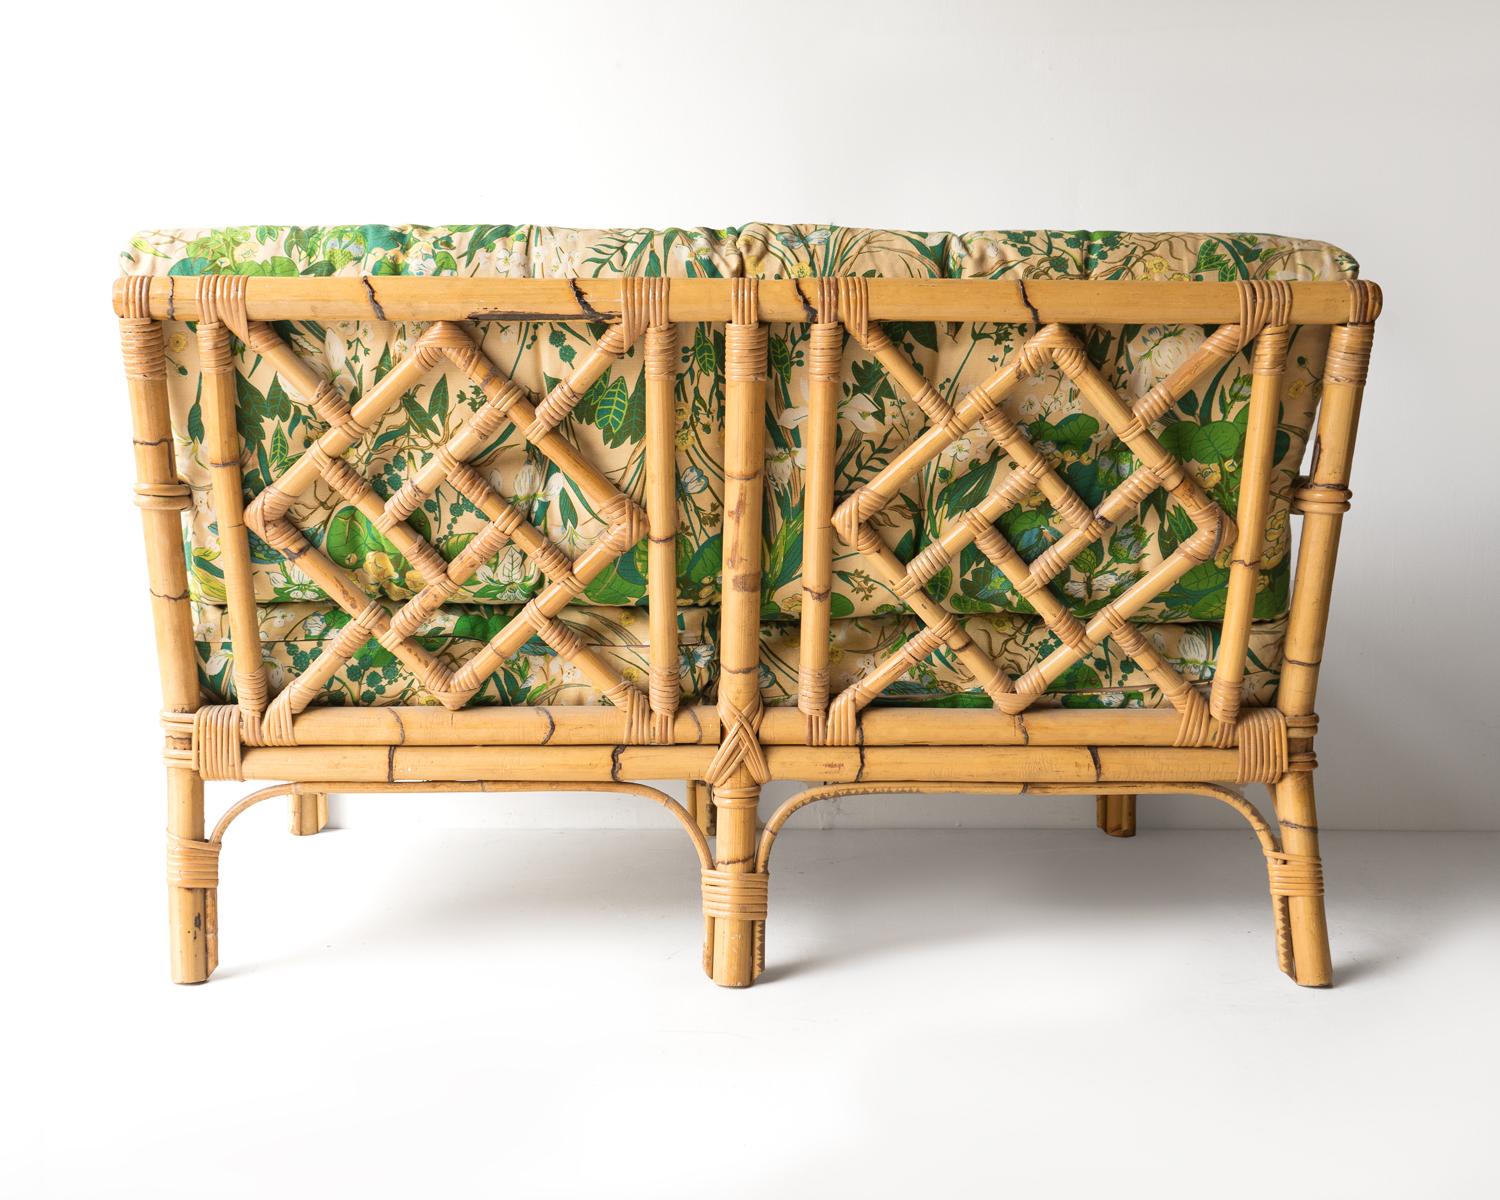 Cotton Vintage Italian Floral Upholstered Bamboo And Rattan Sofa By Vivai Del Sud 1970s